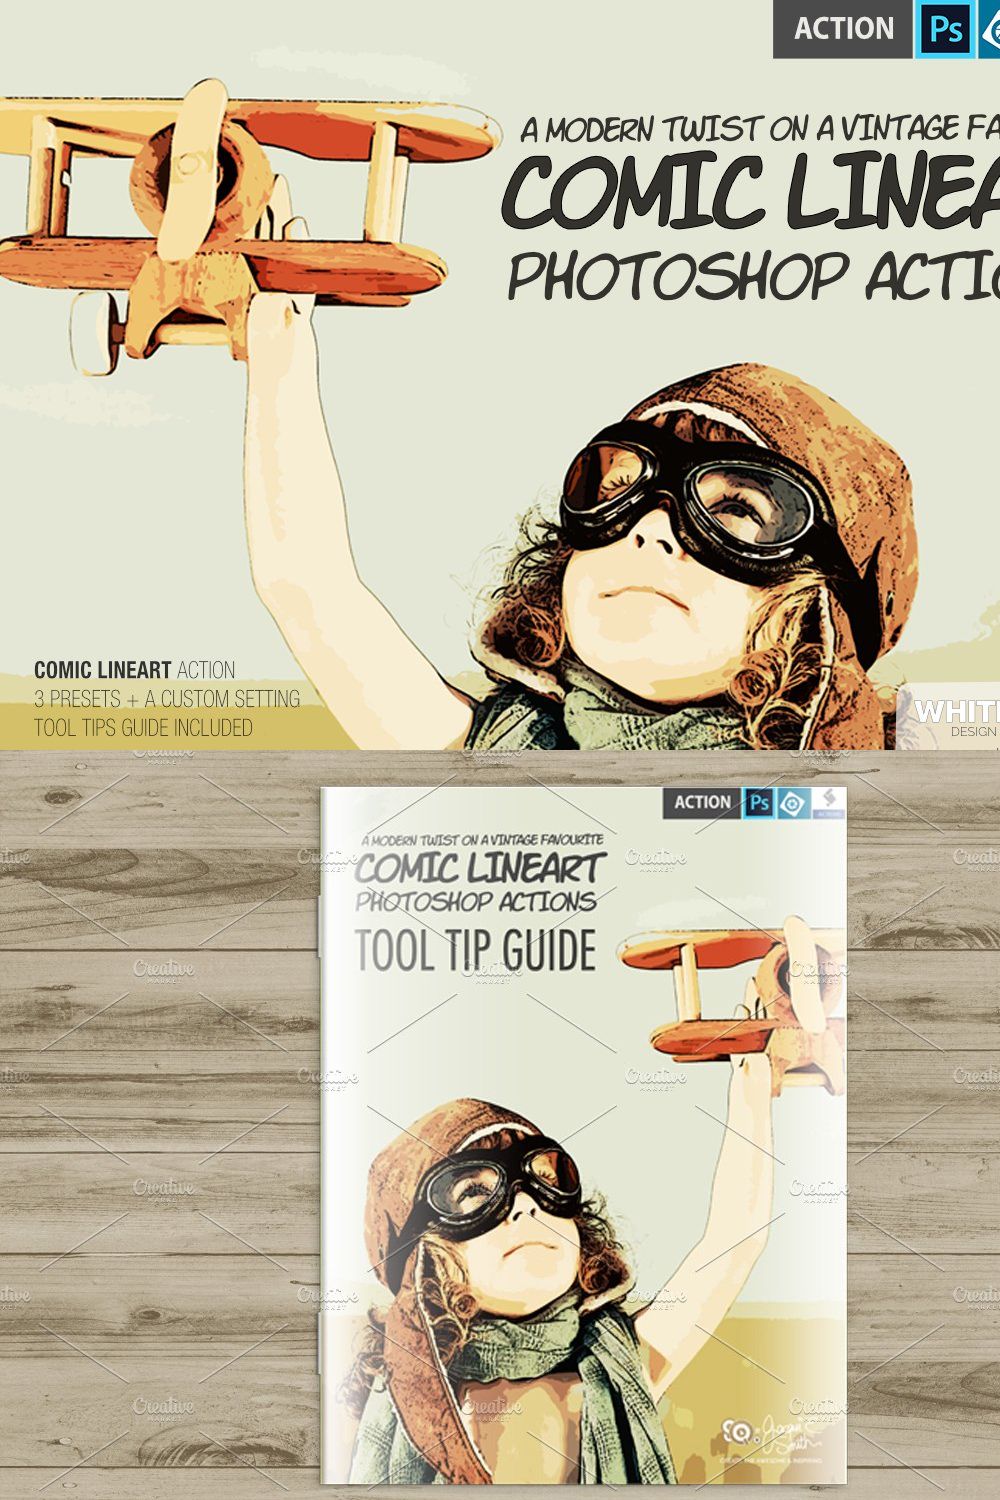 Comic LineArt Actions pinterest preview image.